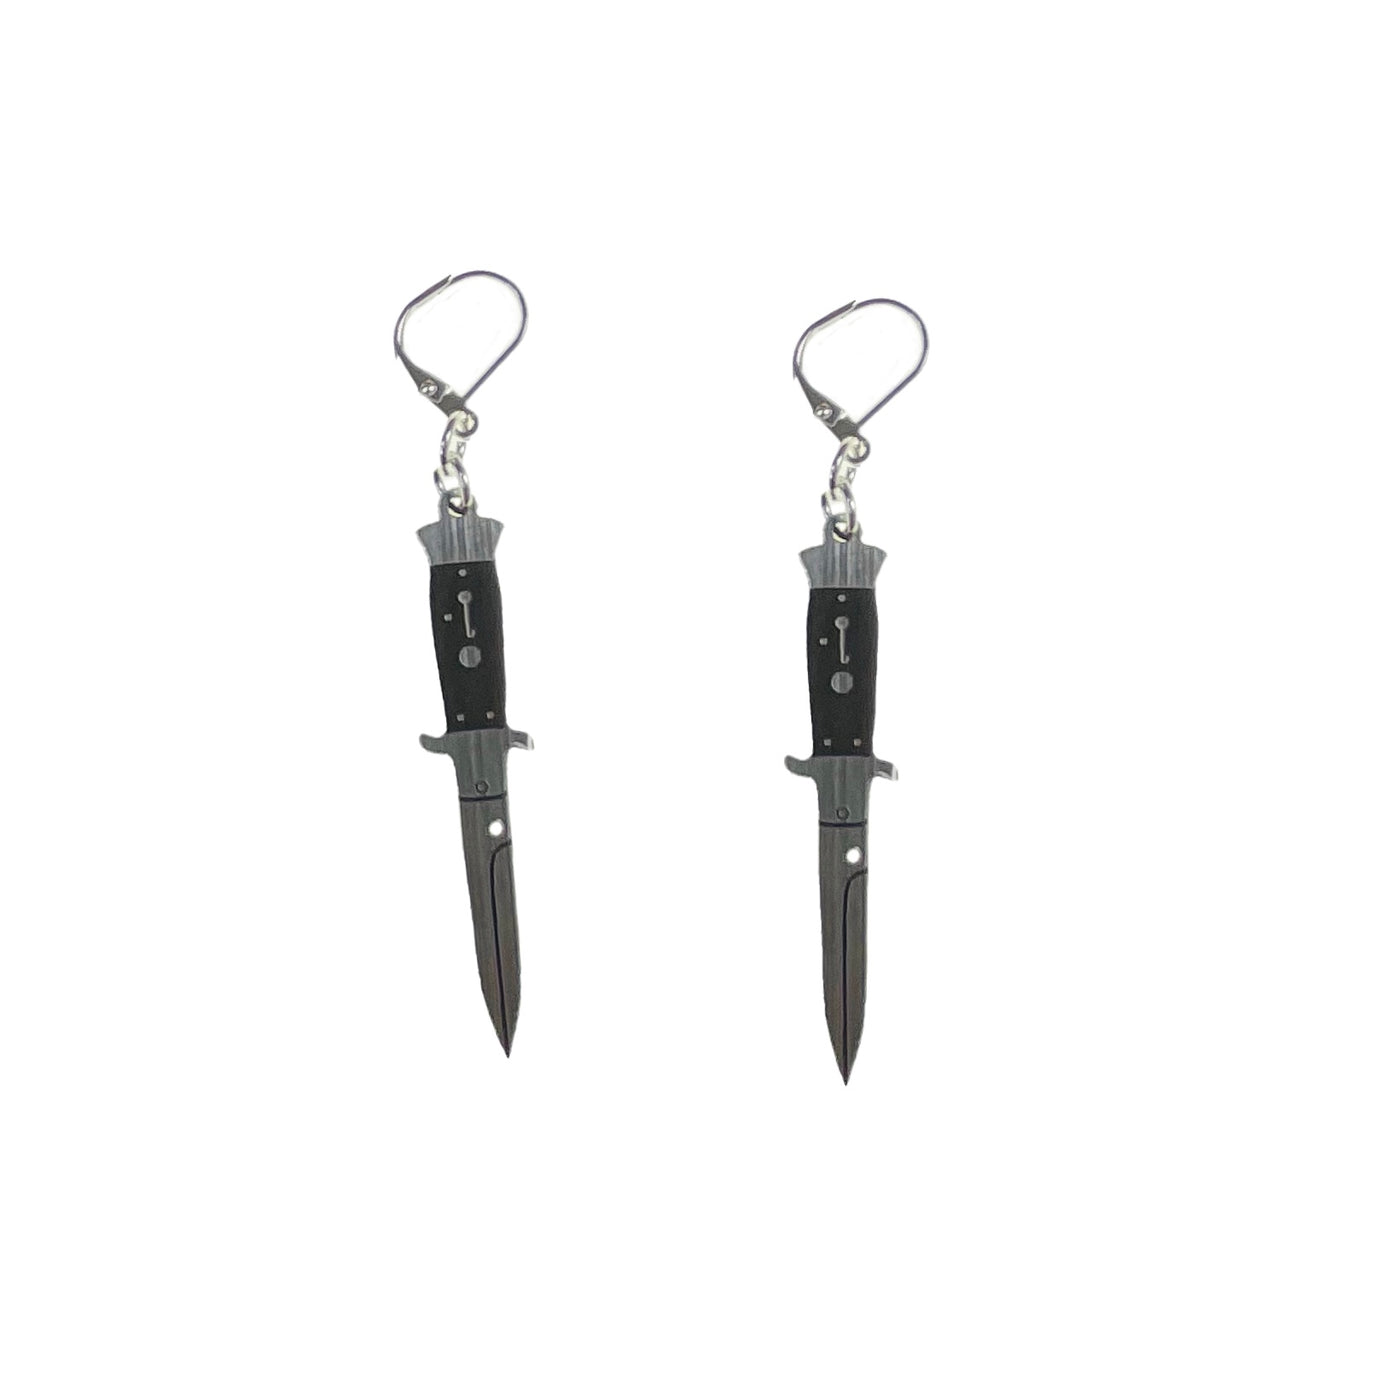 A pair of silver tone switchblade knife dangle earrings sit on a white background. 